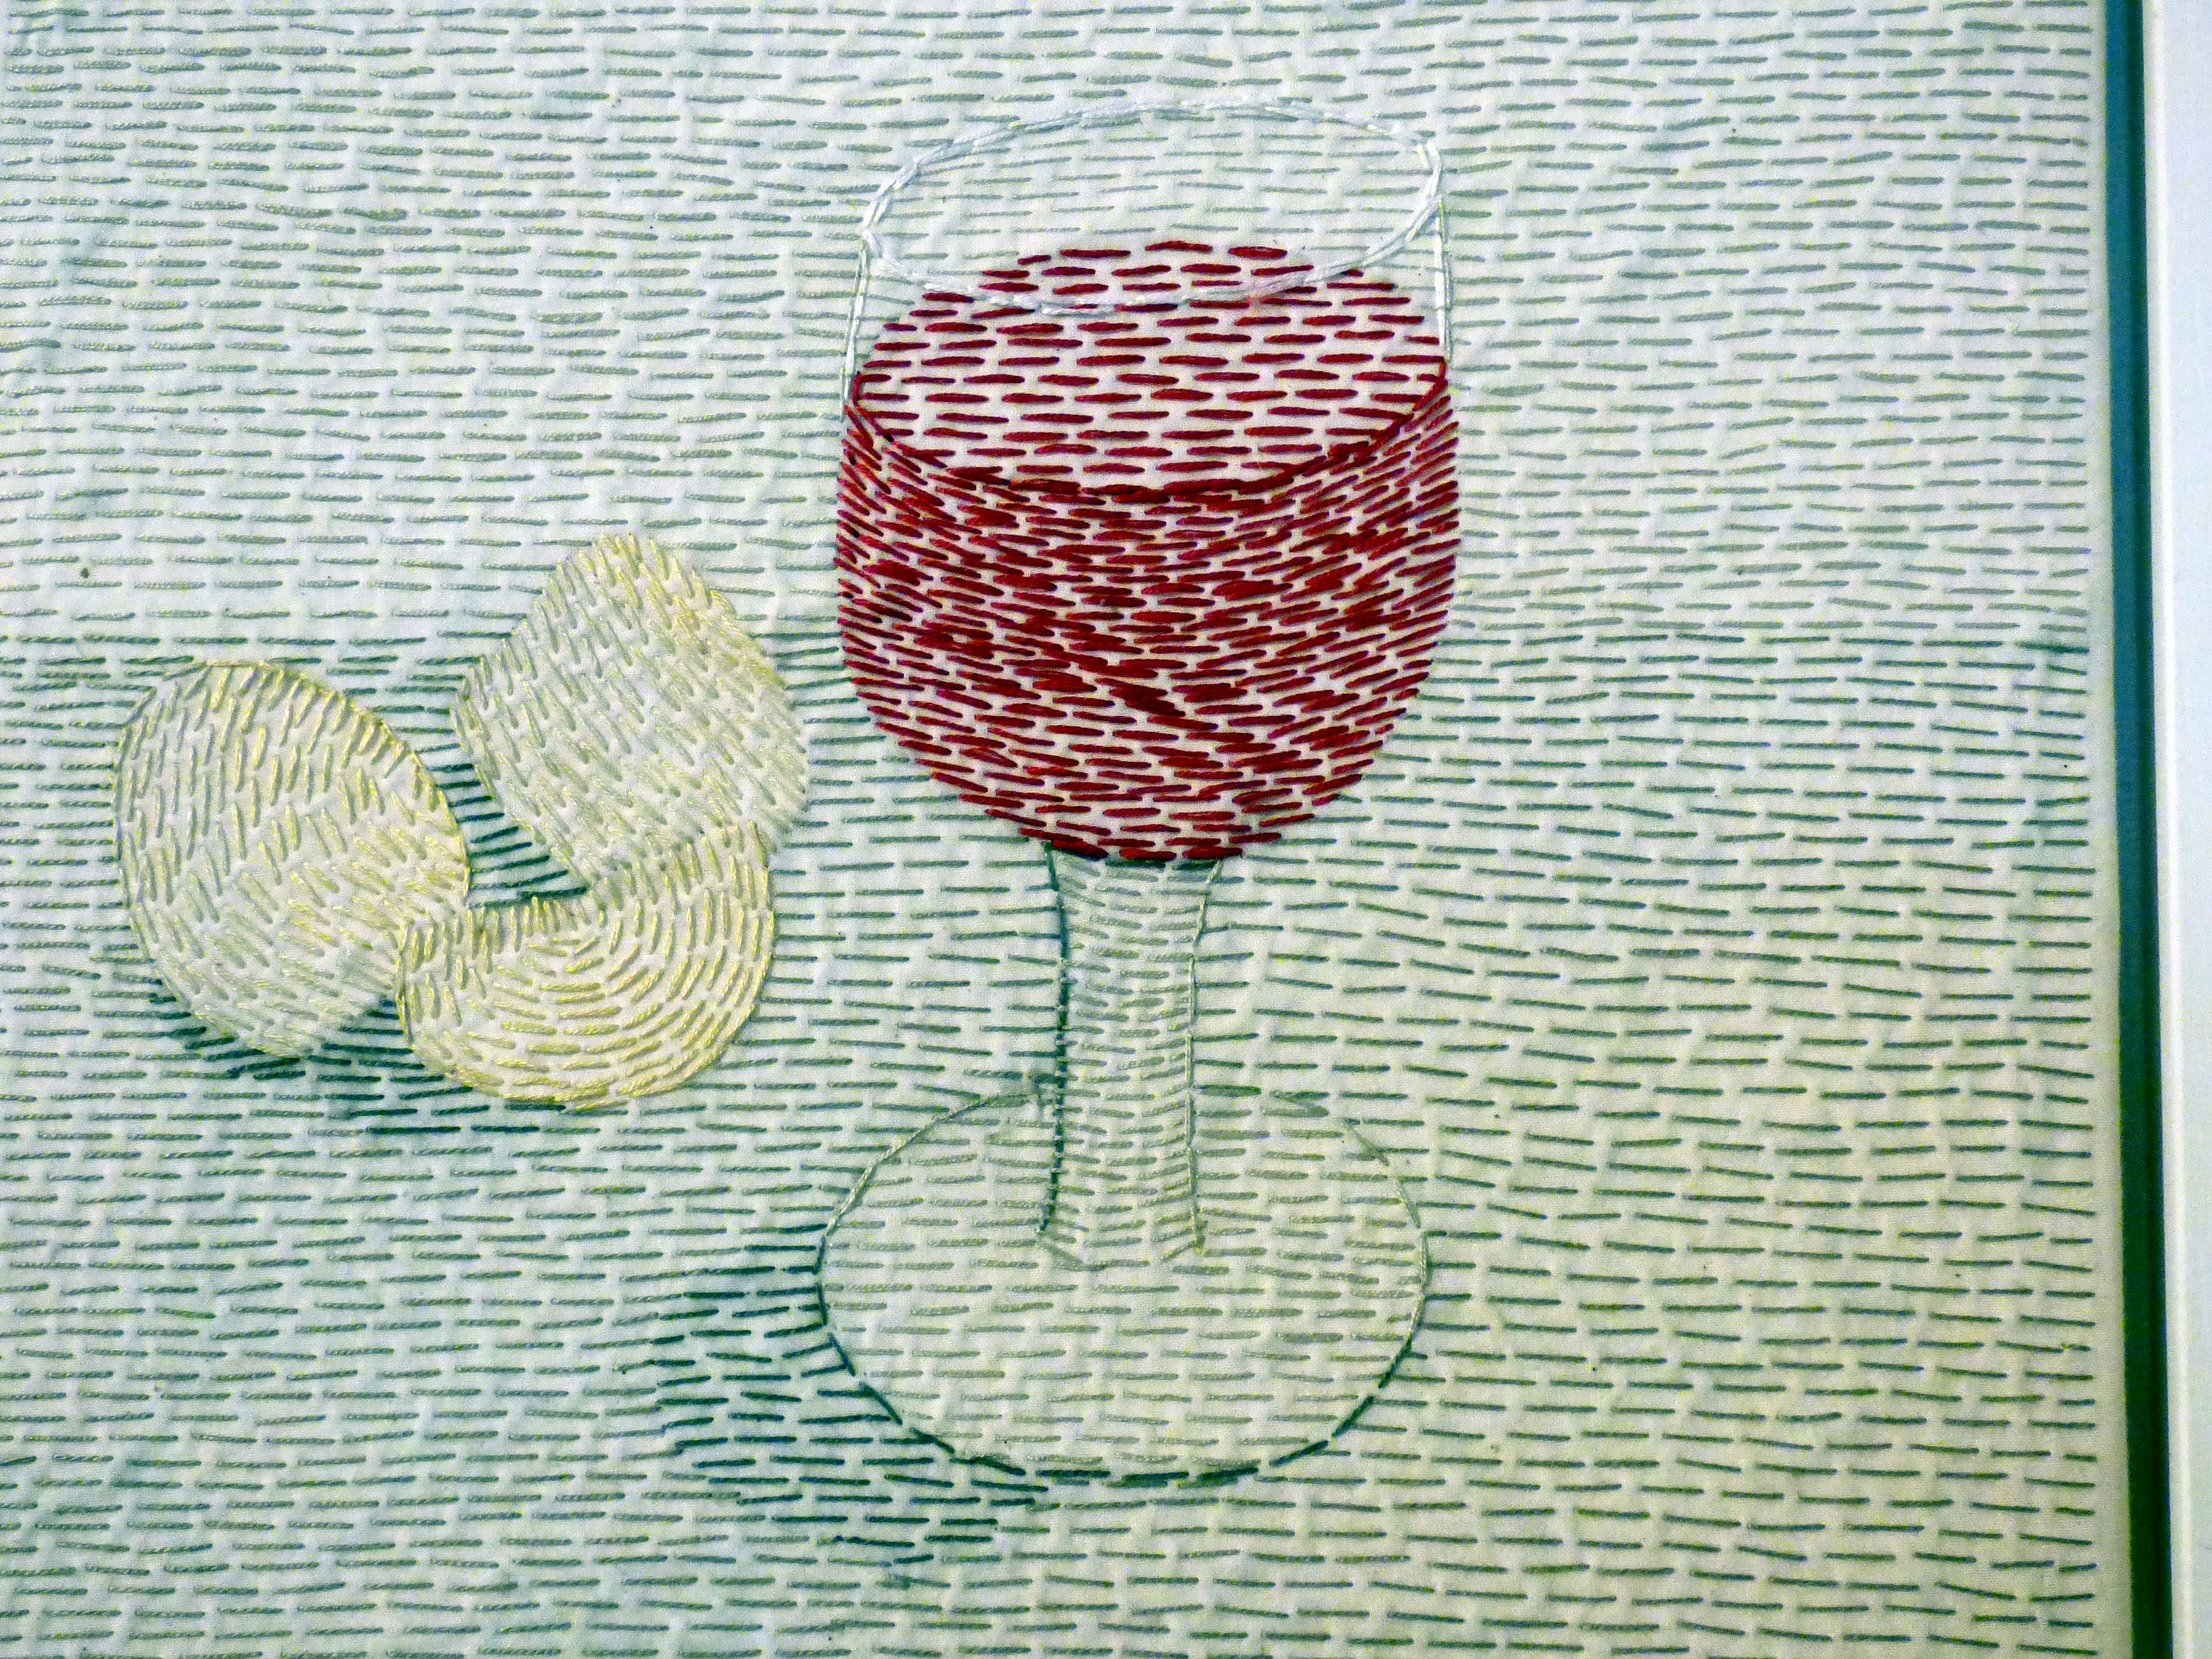 SIMPLE PLEASURES: RED WINE by Audrey Walker, hand stitch, 2014